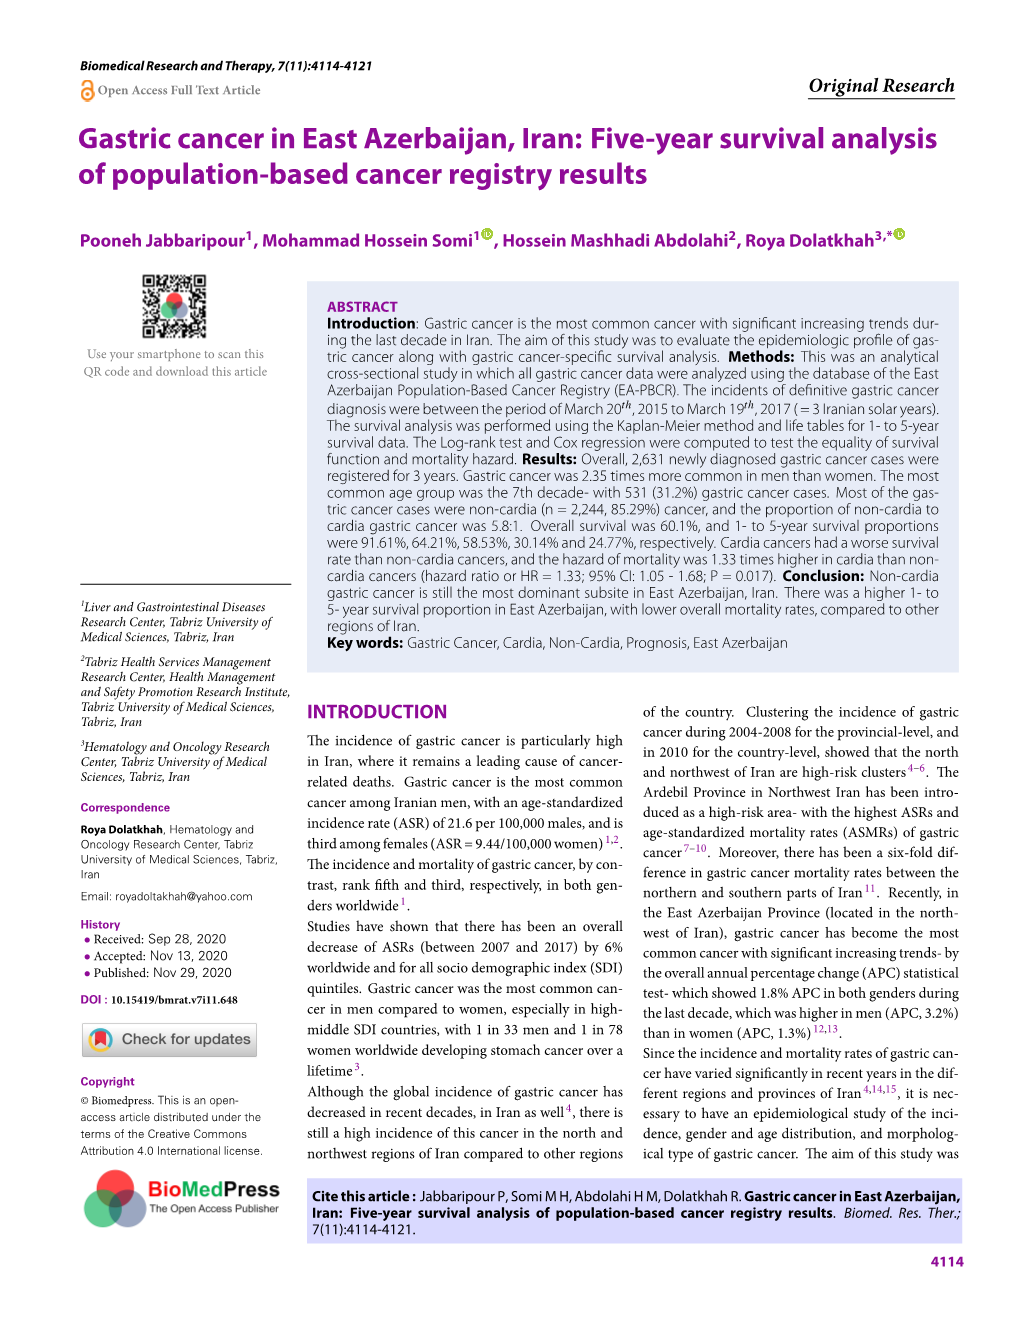 Gastric Cancer in East Azerbaijan, Iran: Five-Year Survival Analysis of Population-Based Cancer Registry Results